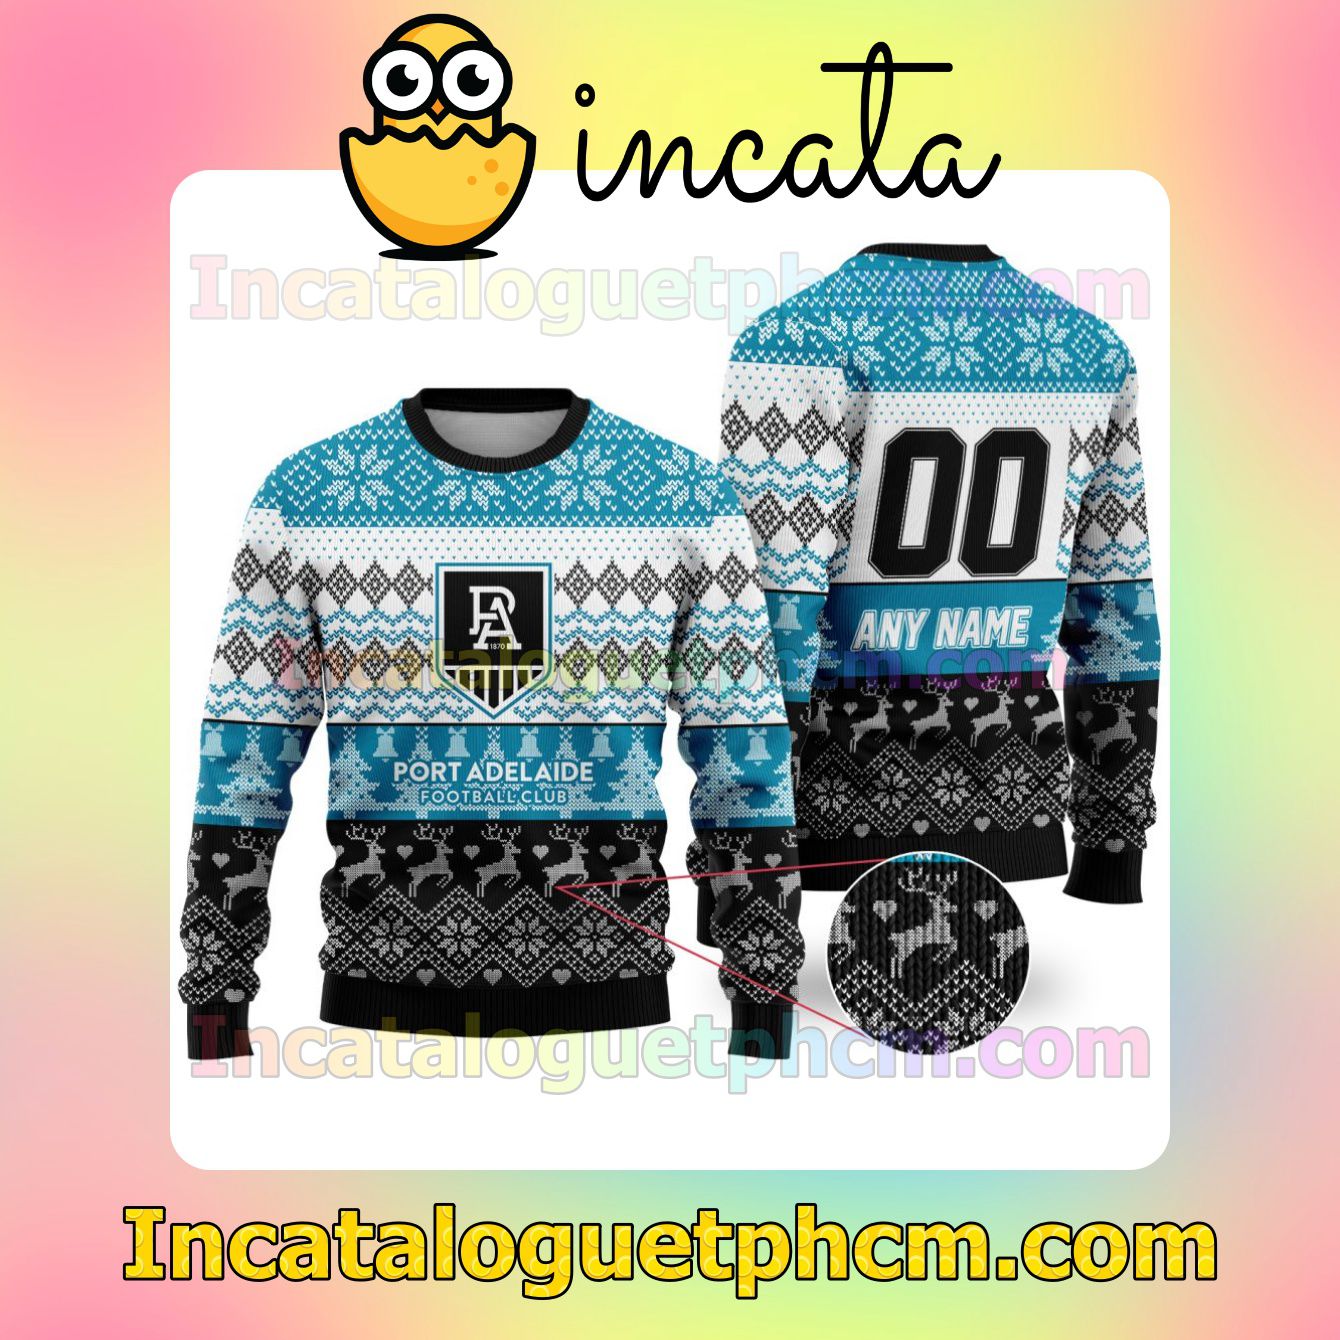 AFL Port Adelaide Football Club Ugly Christmas Jumper Sweater